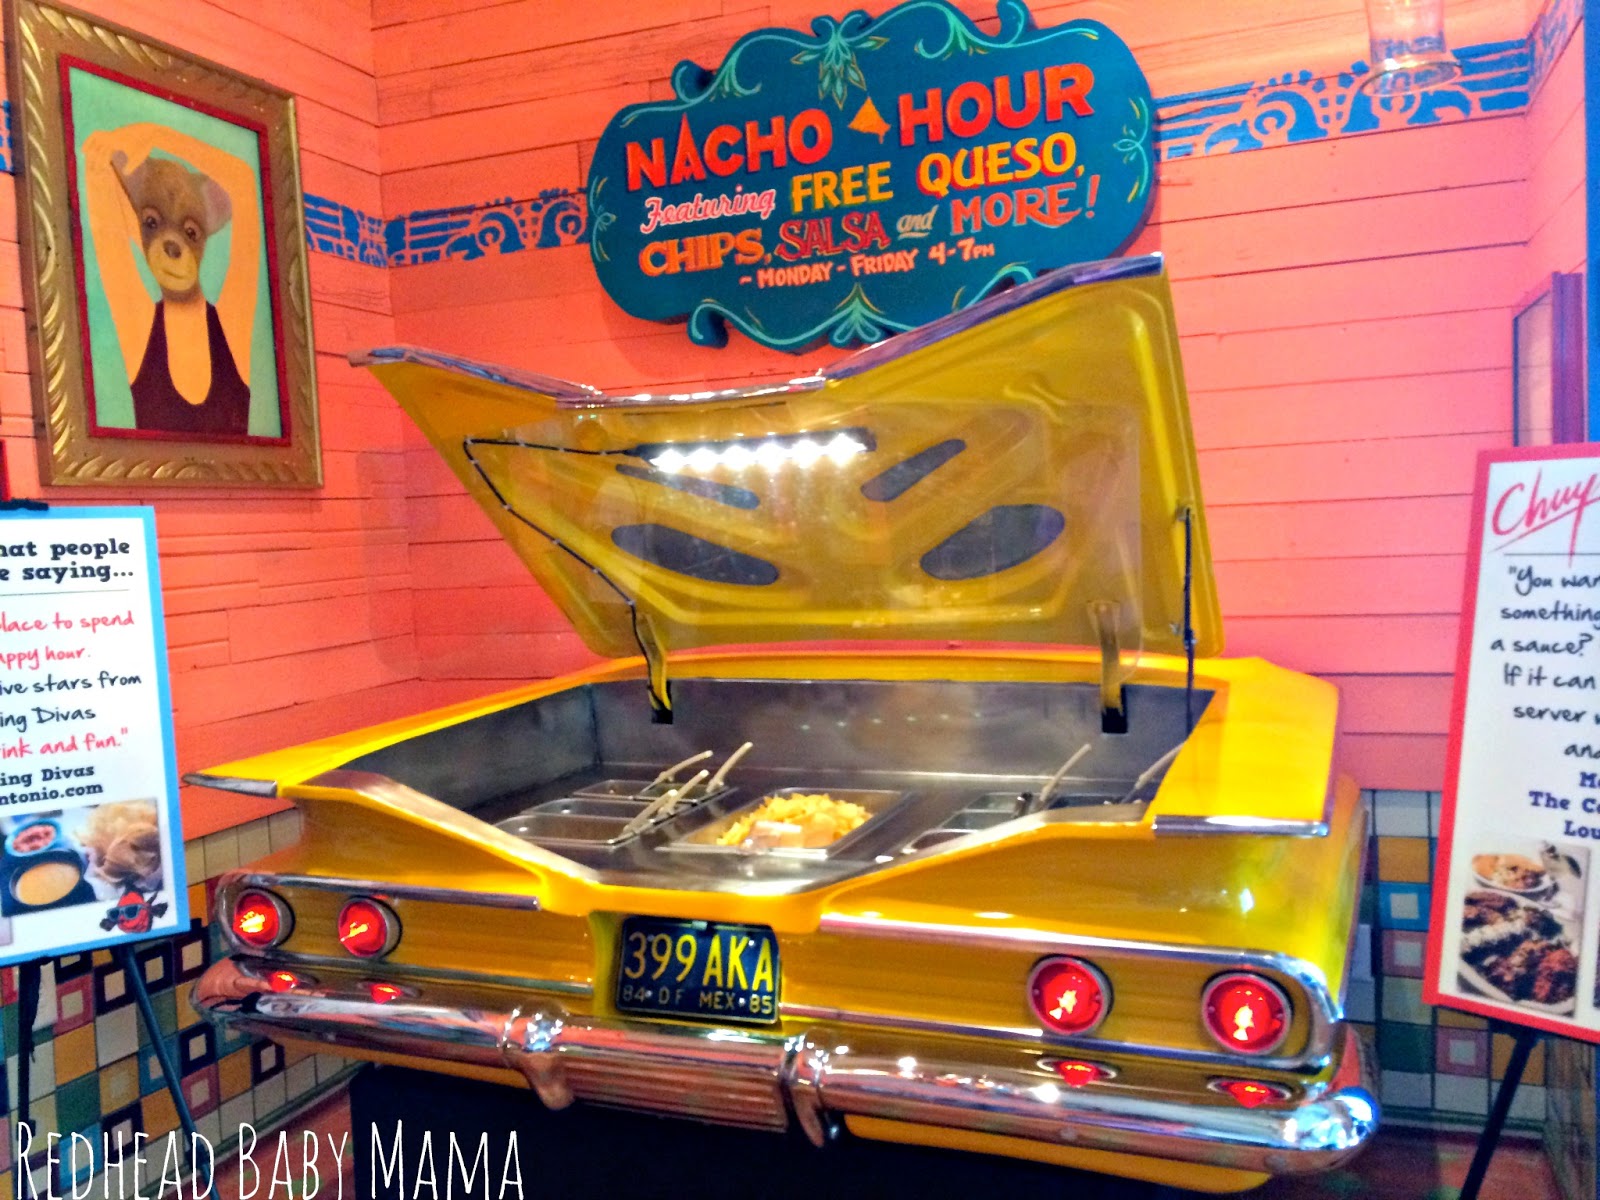 Chuy's Nacho Bar in the trunk of a retro CAR! Free everything from 4-7pm